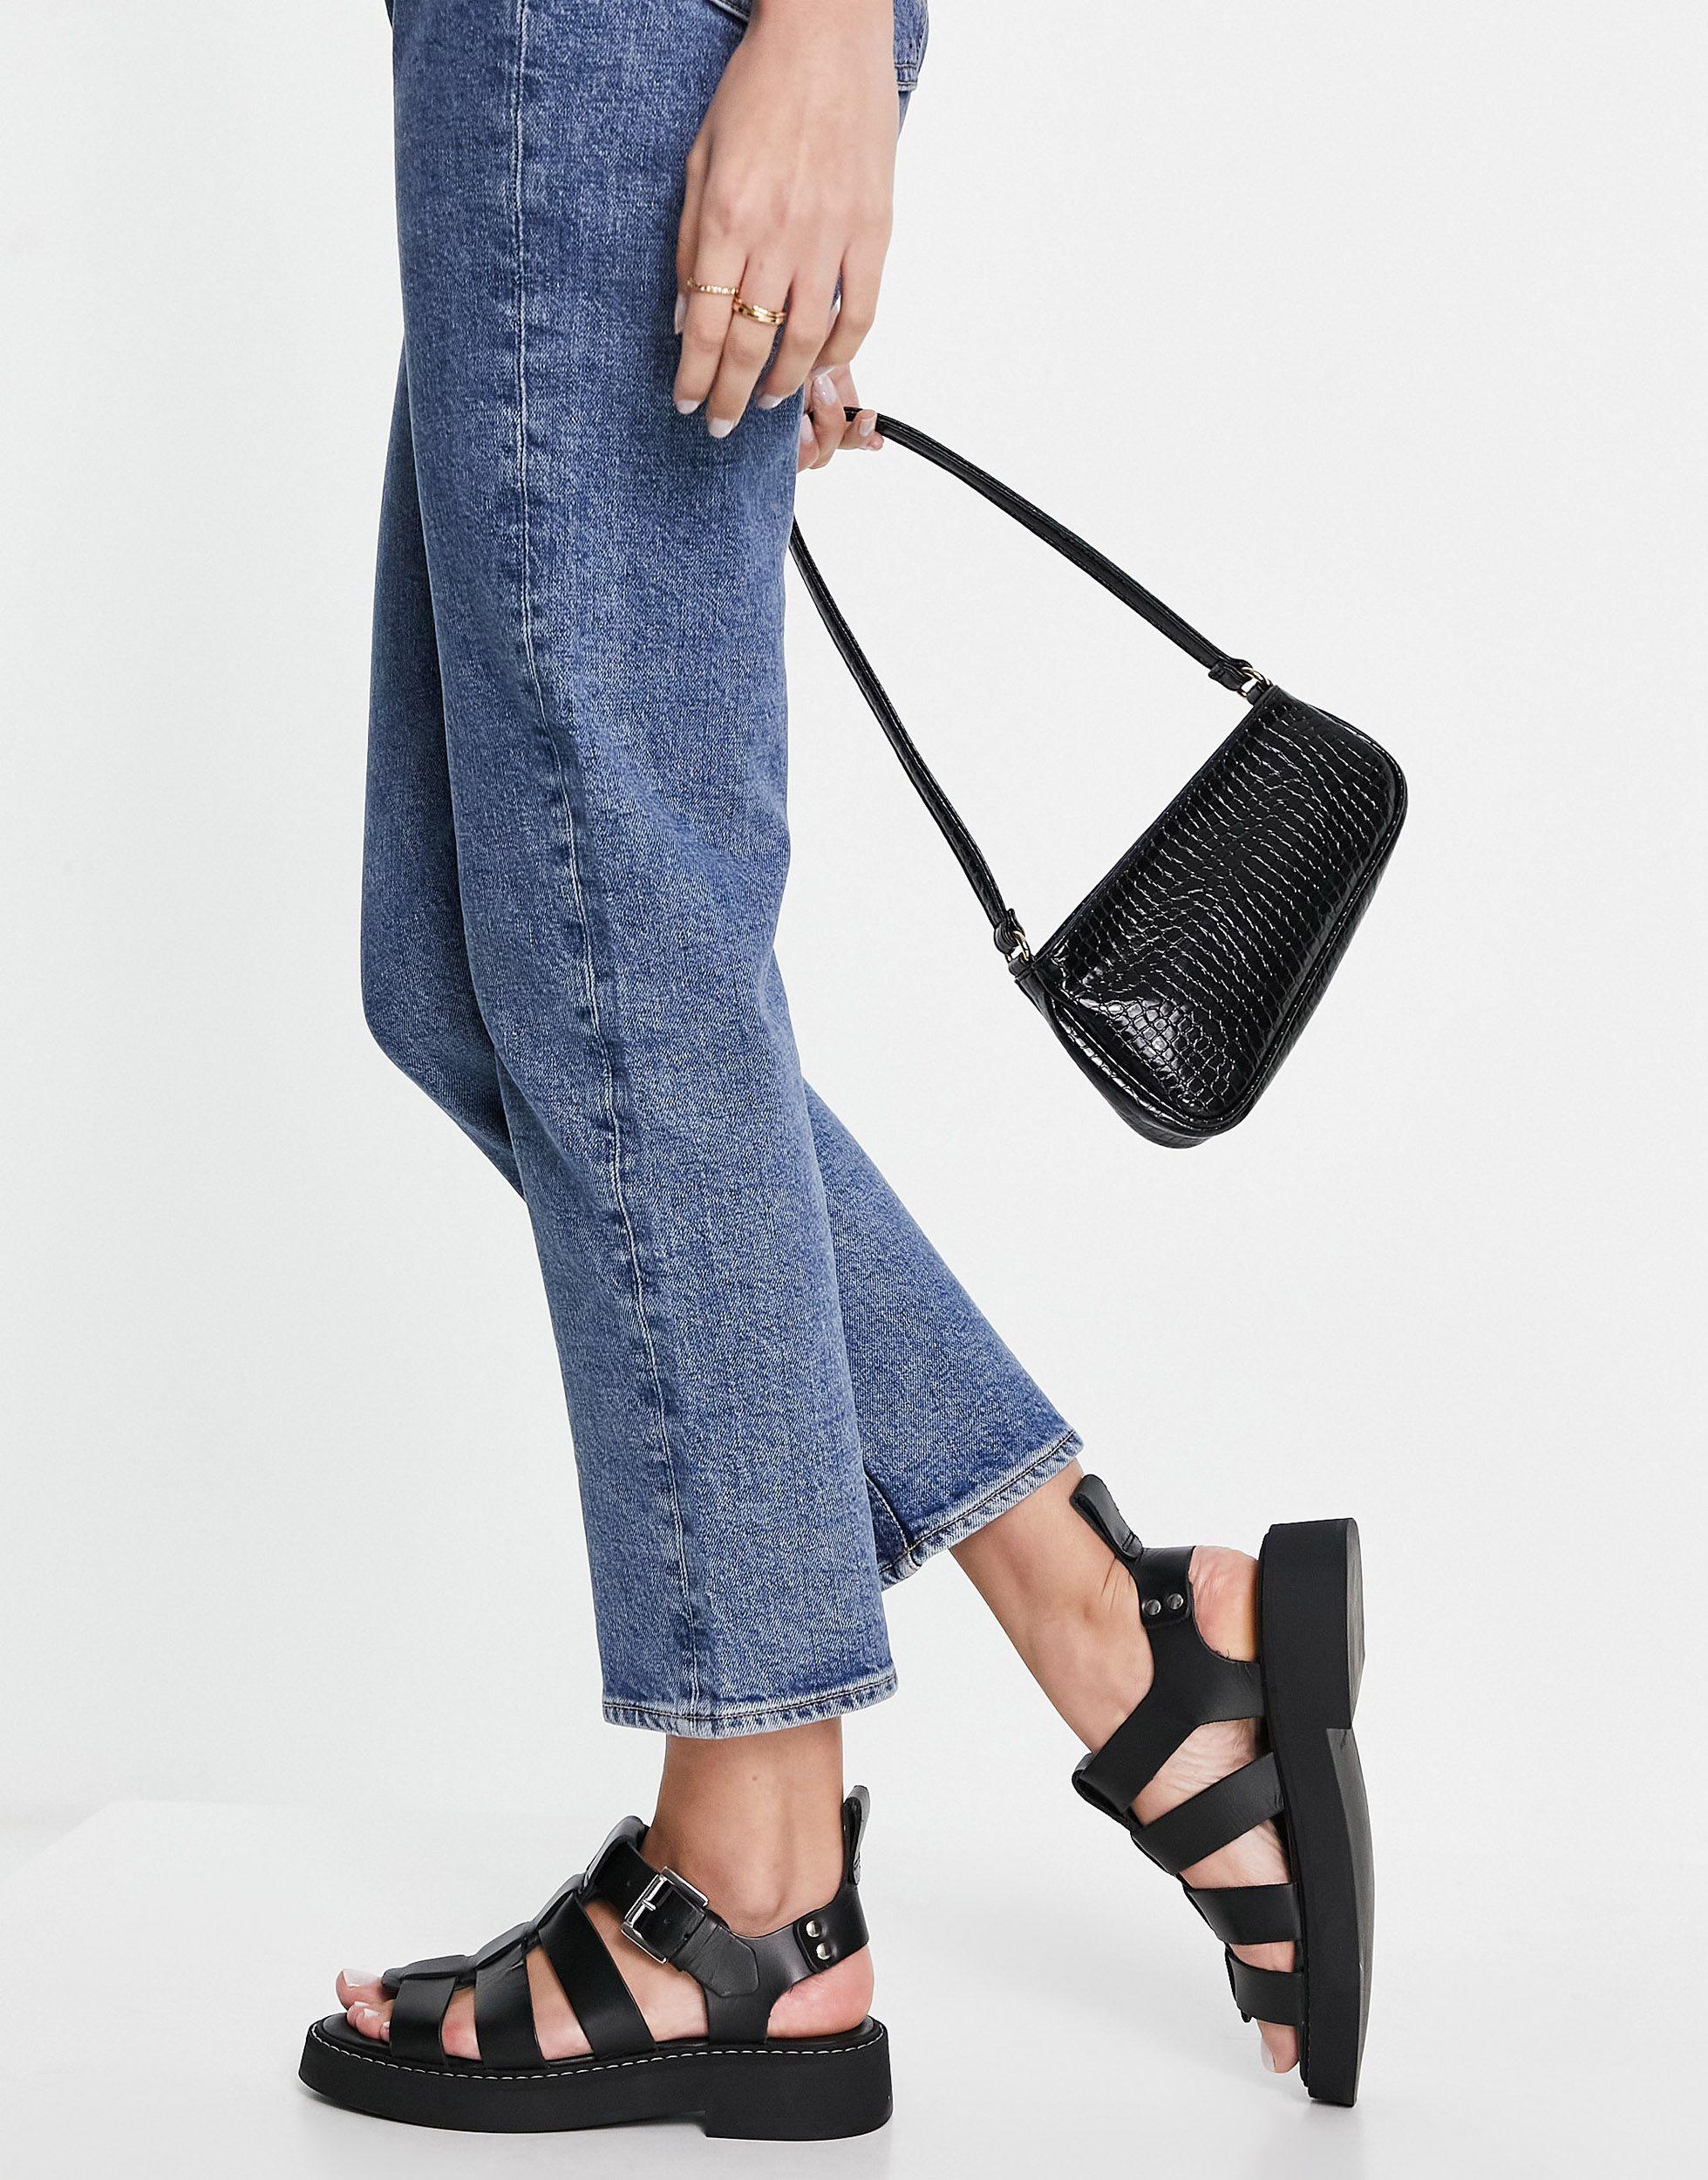 Other Stories Sandals in Black | Lyst